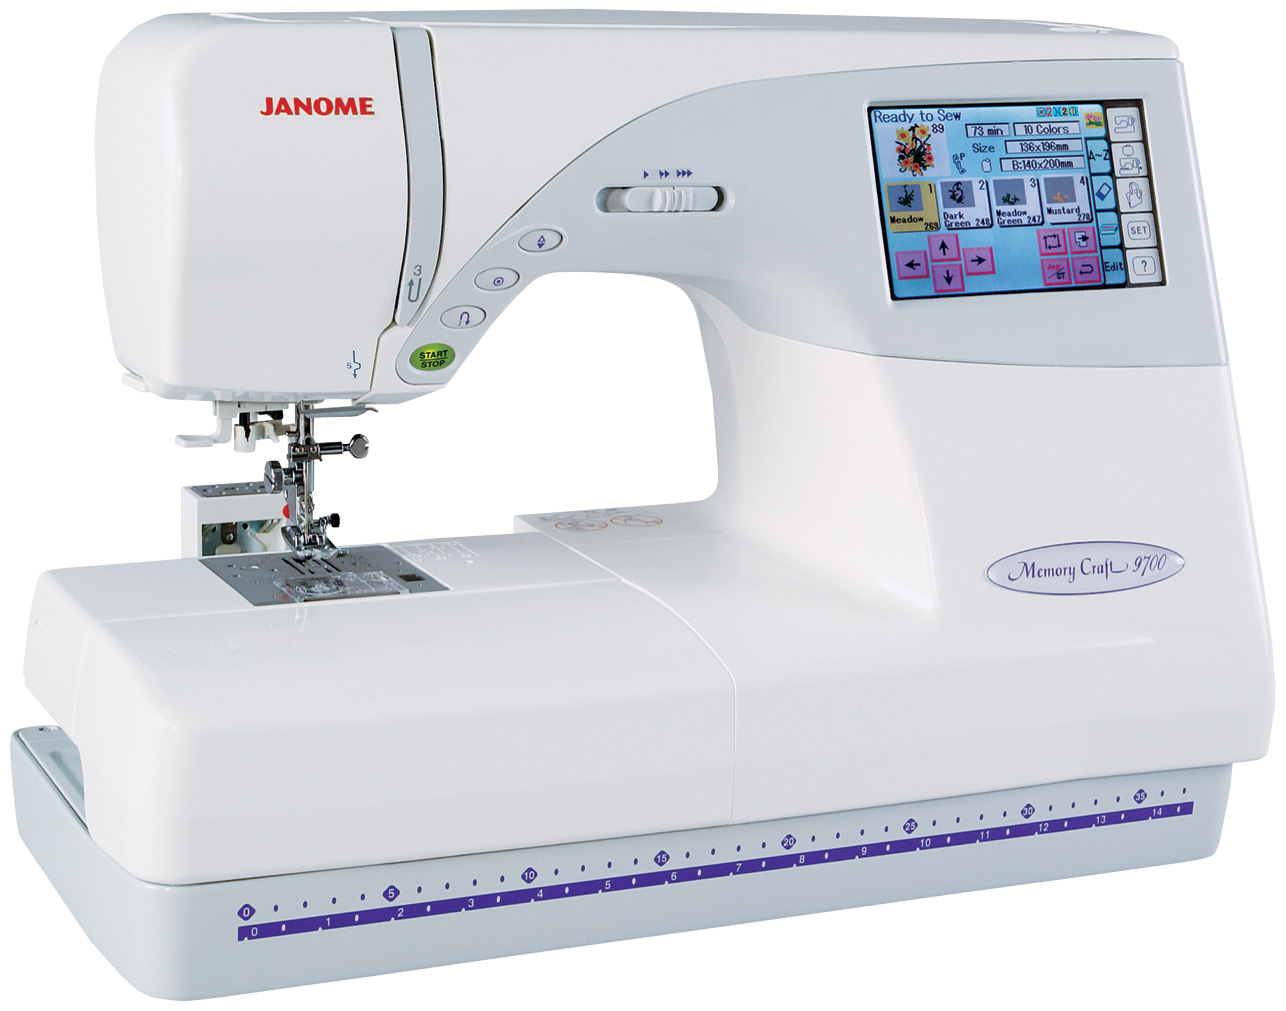 Embroidery Sewing Machine Reviews: Find your Best Embroidery Machine